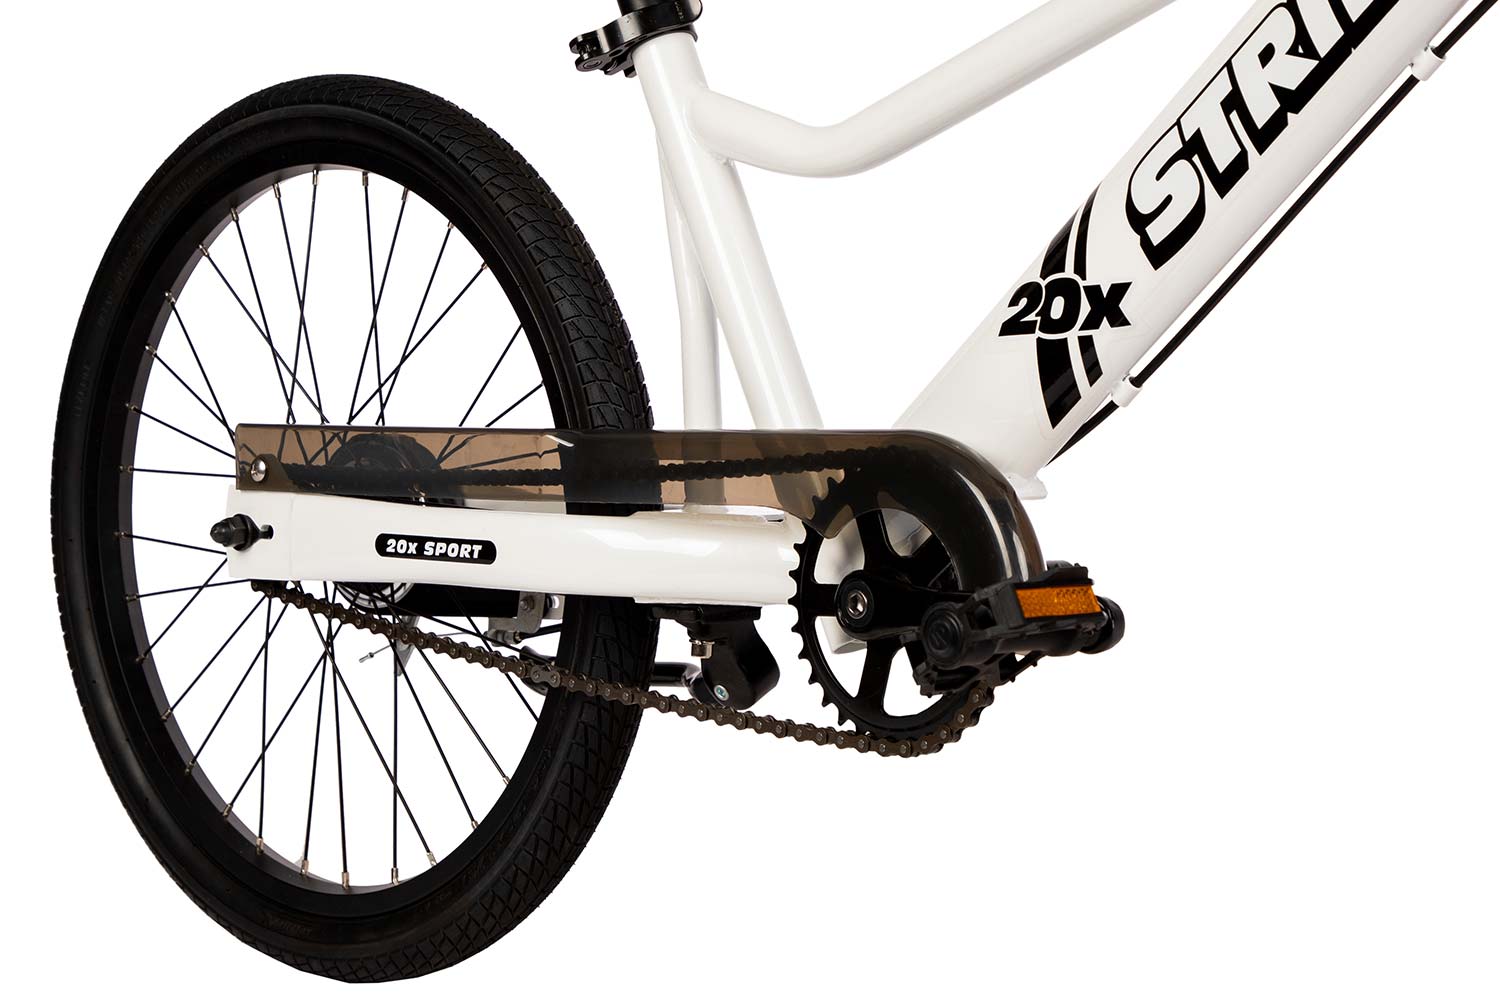 A studio detail of the pedals and chainguard on the Strider 20x Sport, a 20" all-in-one balance and pedal bike